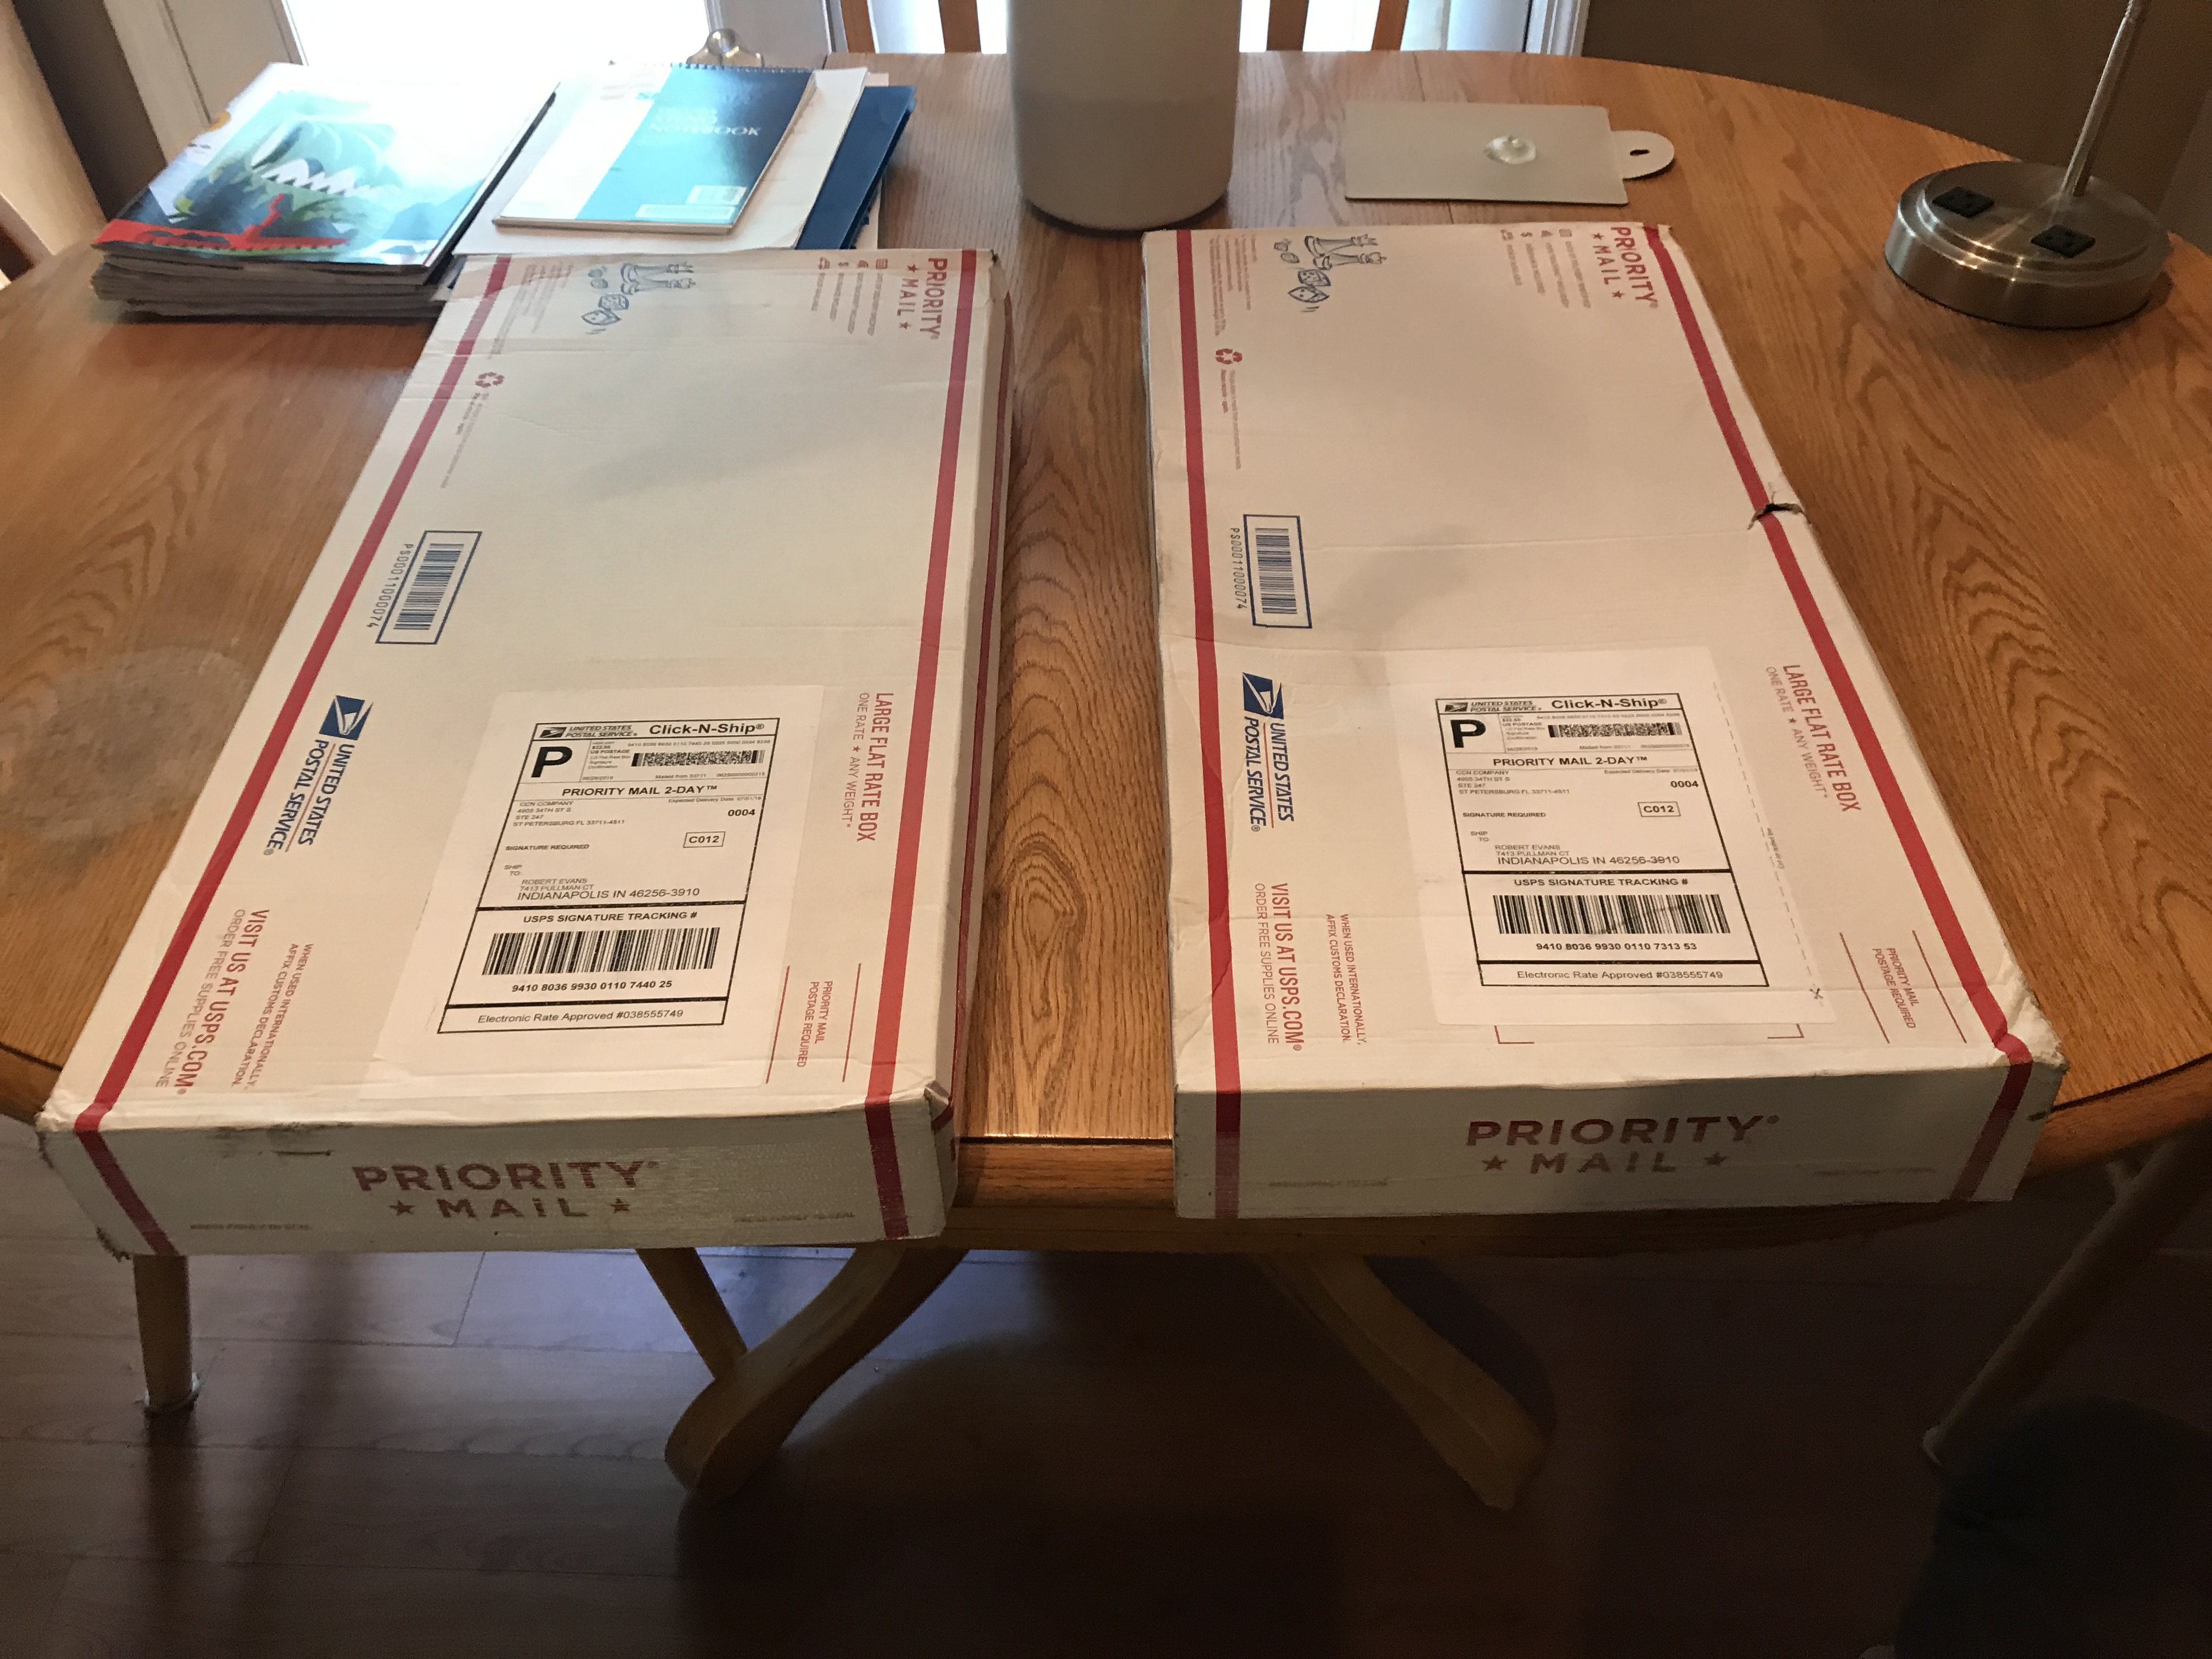 i ordered boxes 2 diff dates, I got all 4 same day